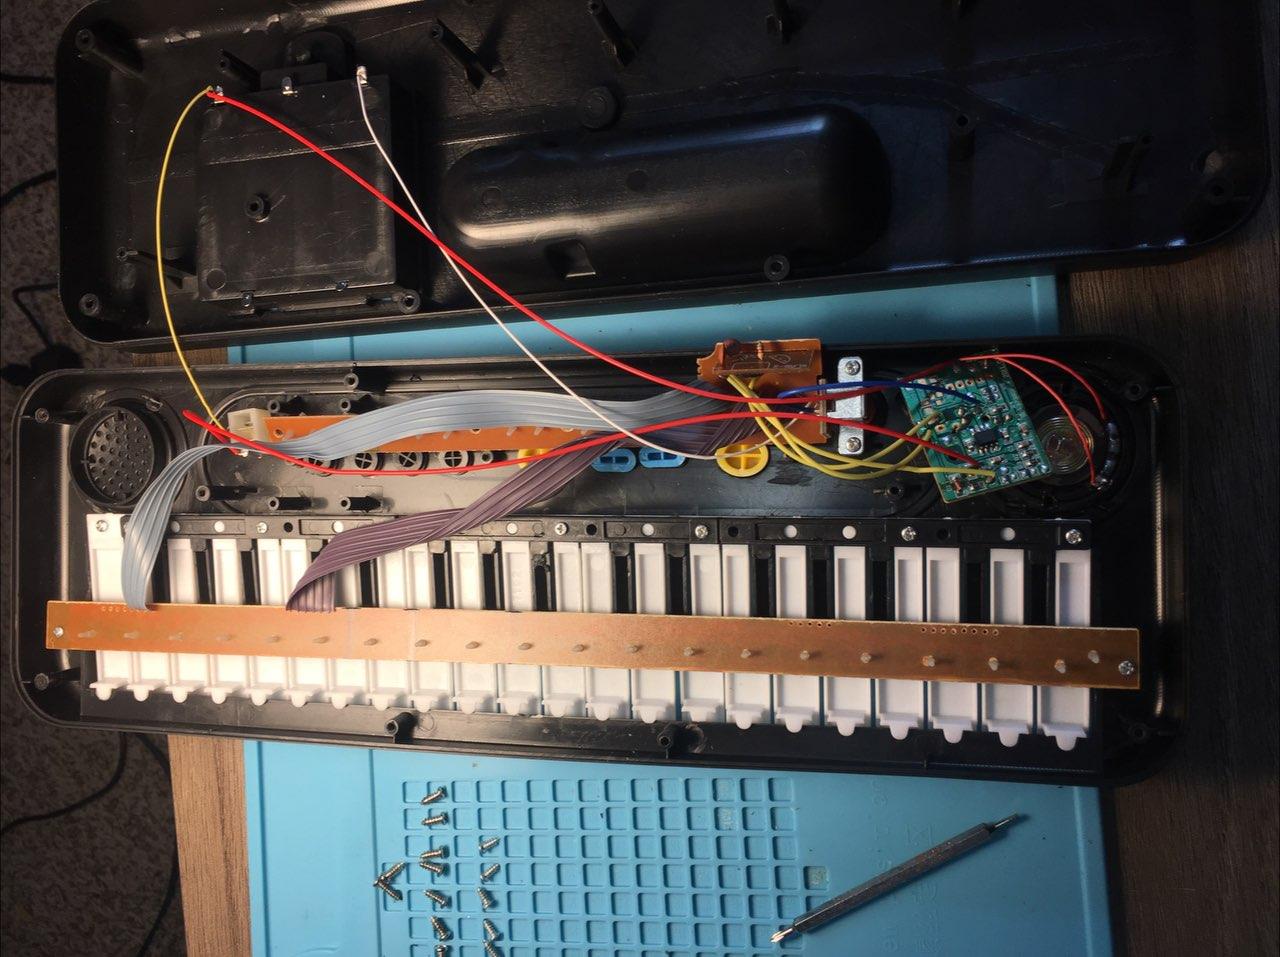 Interior of the piano, detailing the keyboard PCB